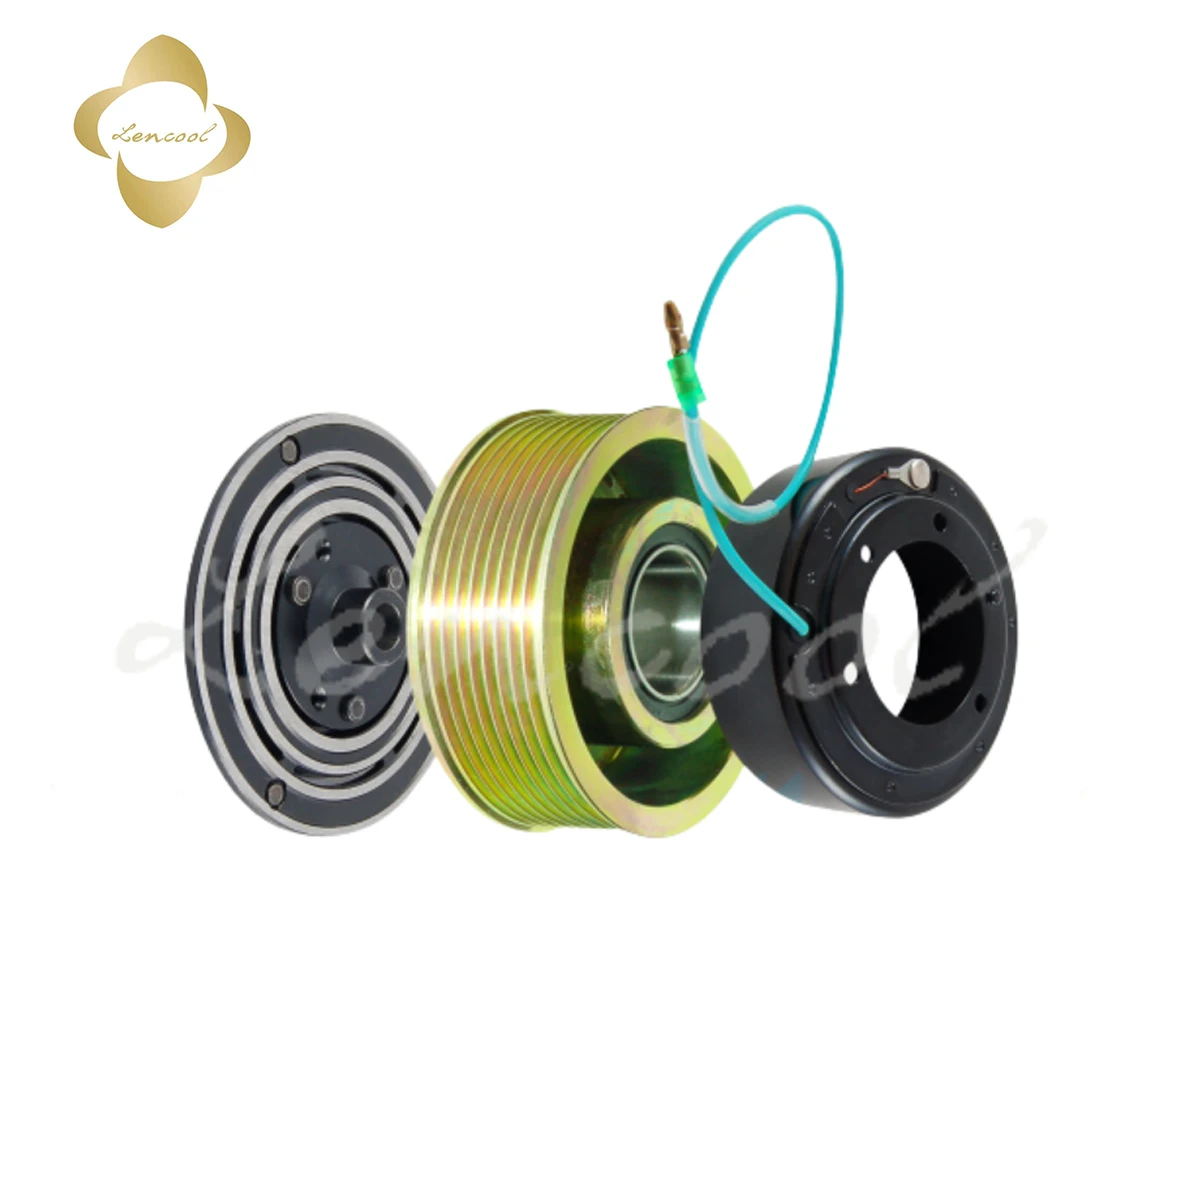 

AC A/C Air Conditioning Compressor Clutch Pulley FOR UNIVERSAL SANDEN 5H14 8PK 119,00 MM 24V